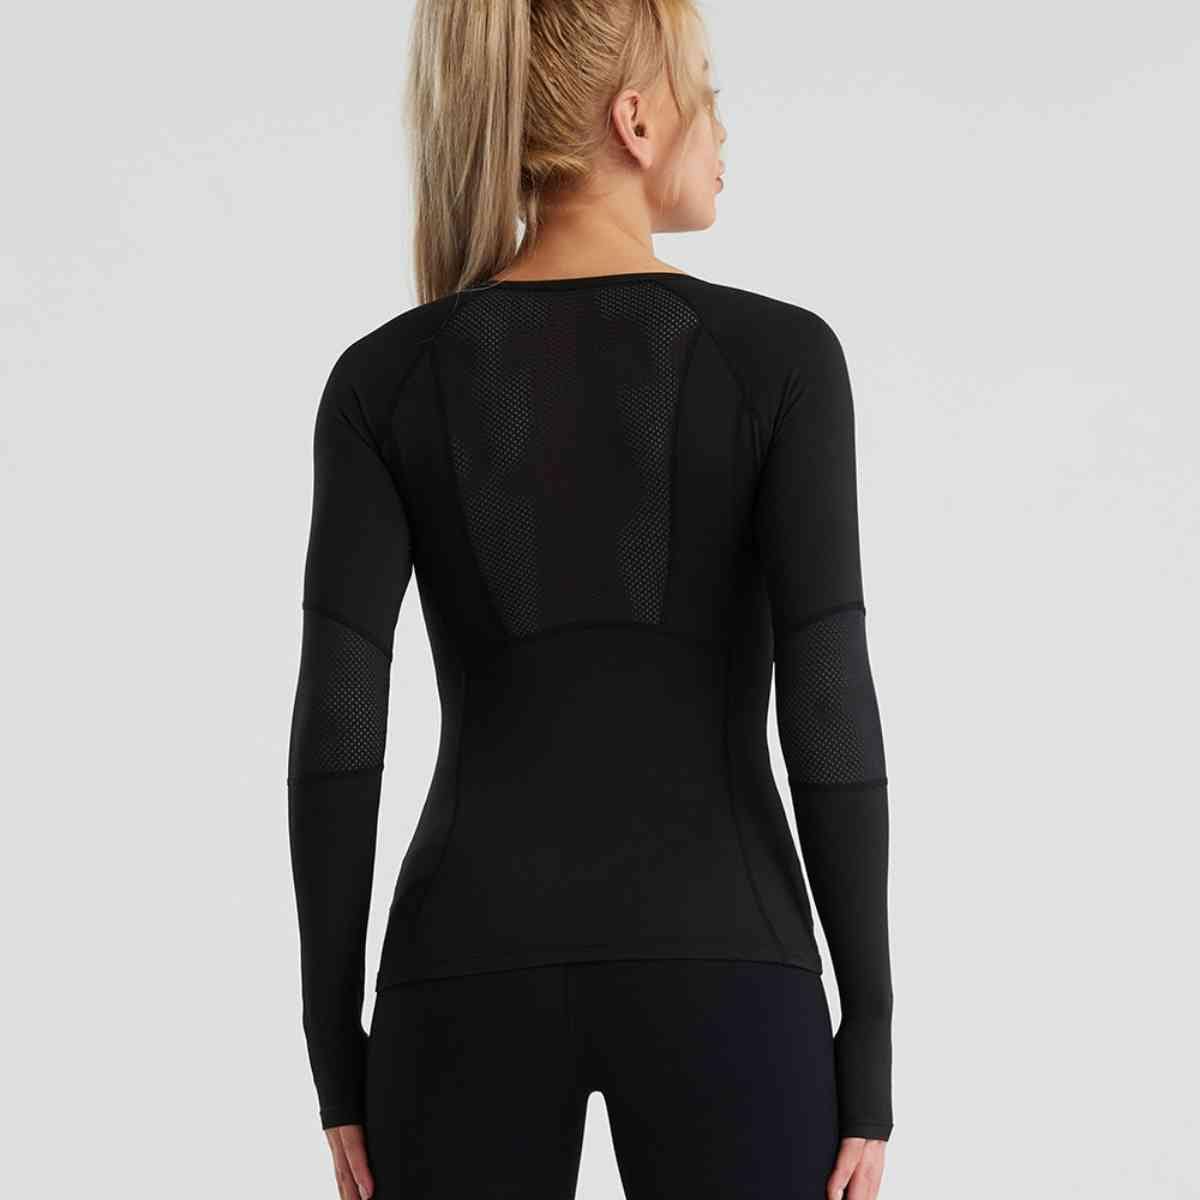 Trendsi Round Neck Sports Top Long Sleeve Round Neck Sports Top